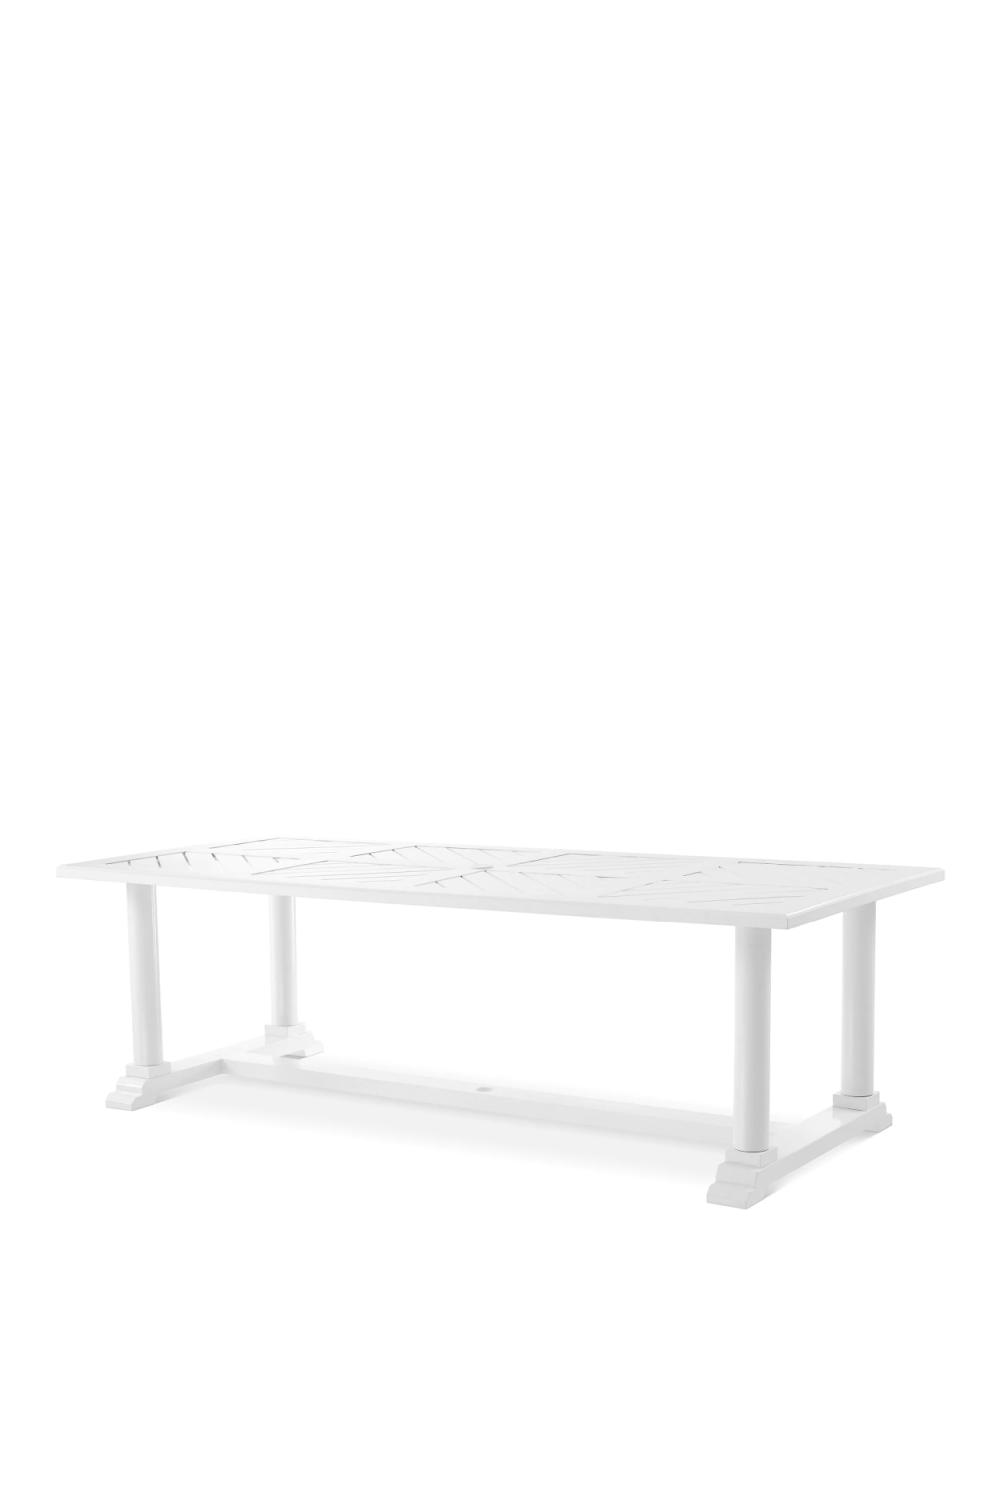 White Lacquer Outdoor Dining Table | Eichholtz Bell Rive | OROA TRADE